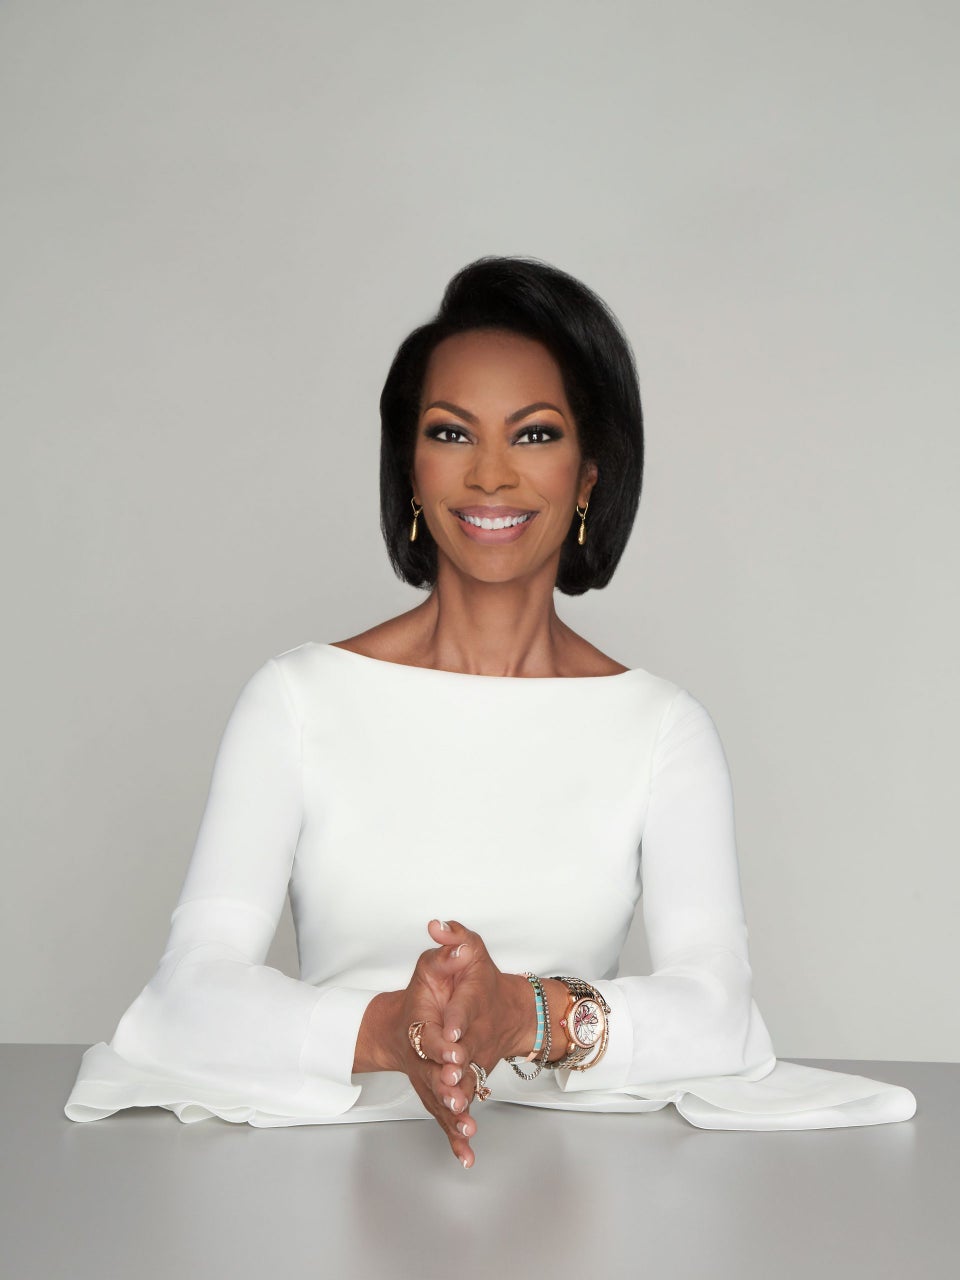 Cable News Anchor Harris Faulkner On Practicing Self Care While